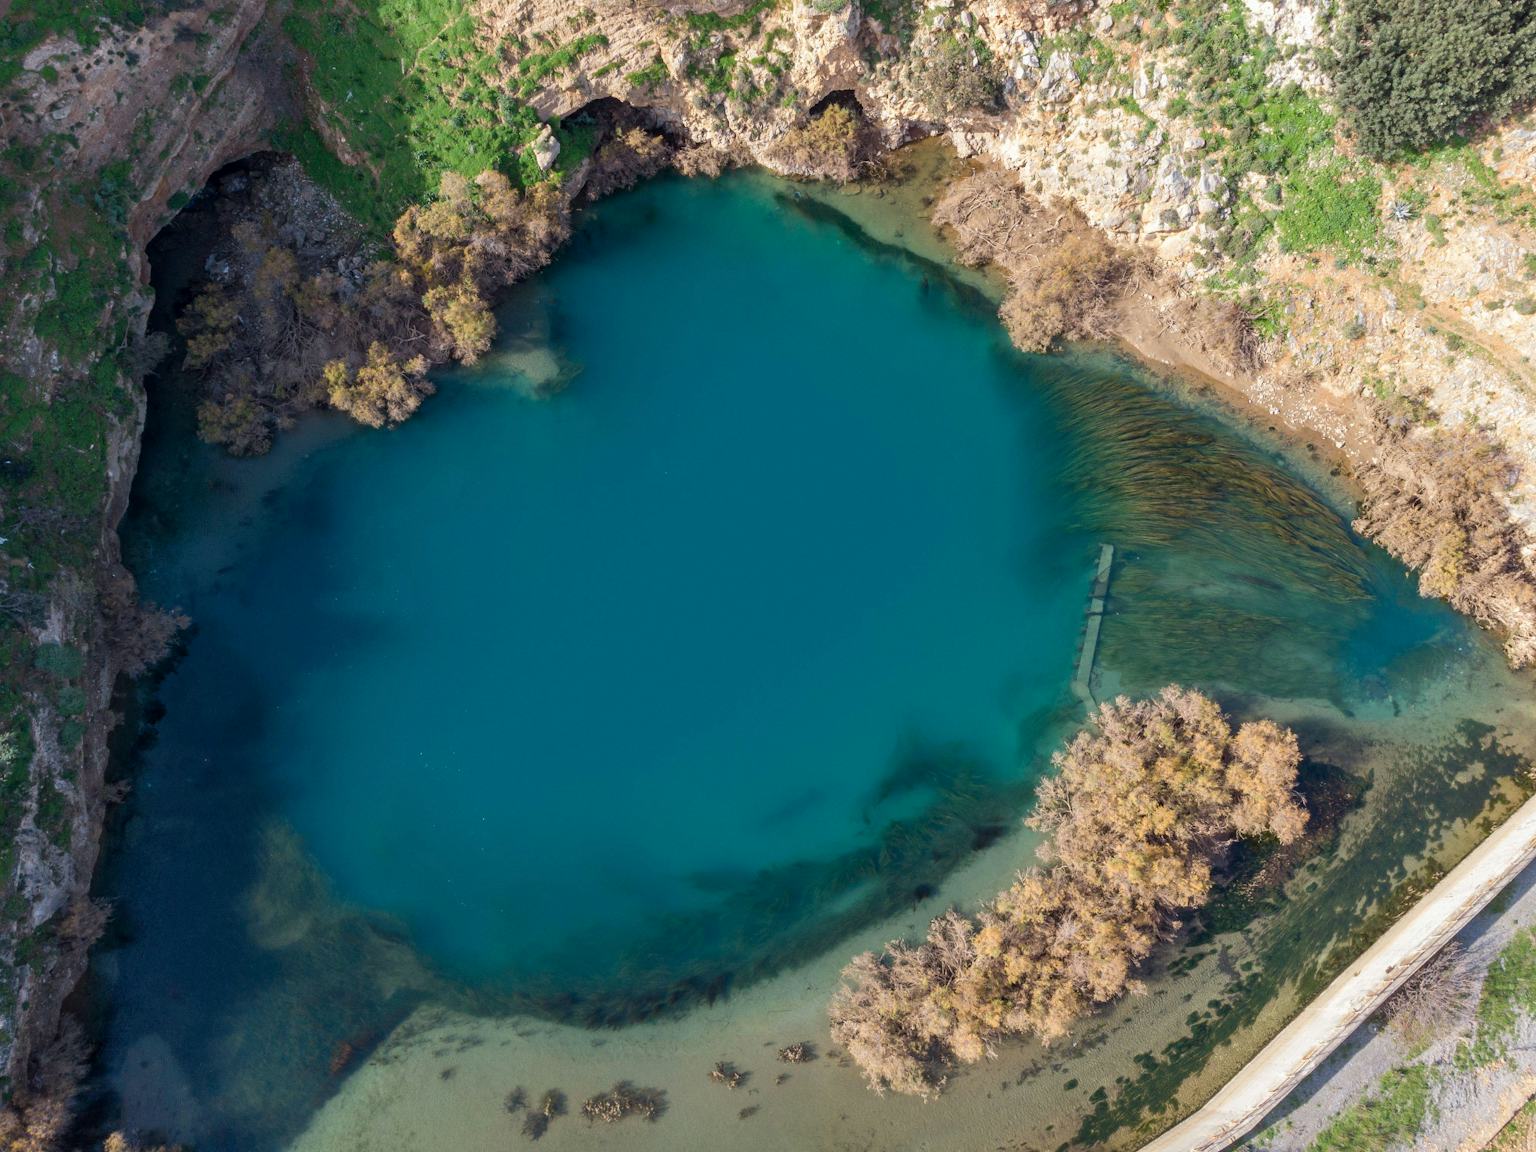 Discover One of Earth's Most Vital Karst Springs!